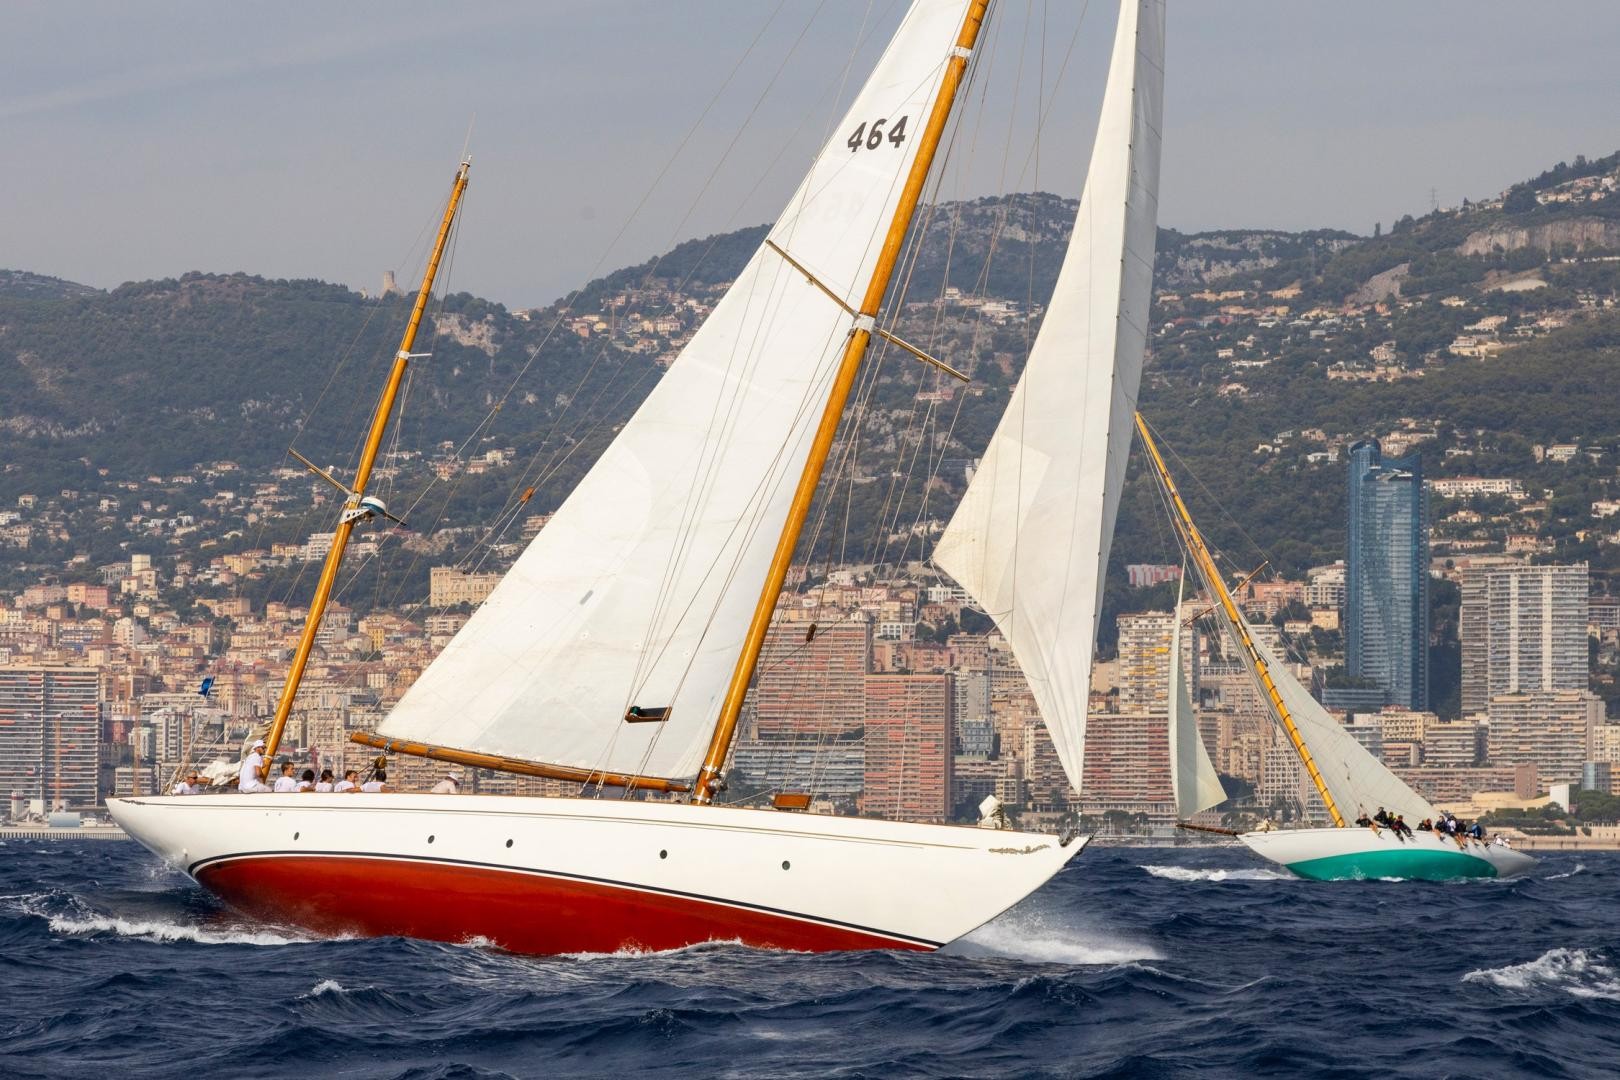 The Golden Age of yachting brought to life in Monaco